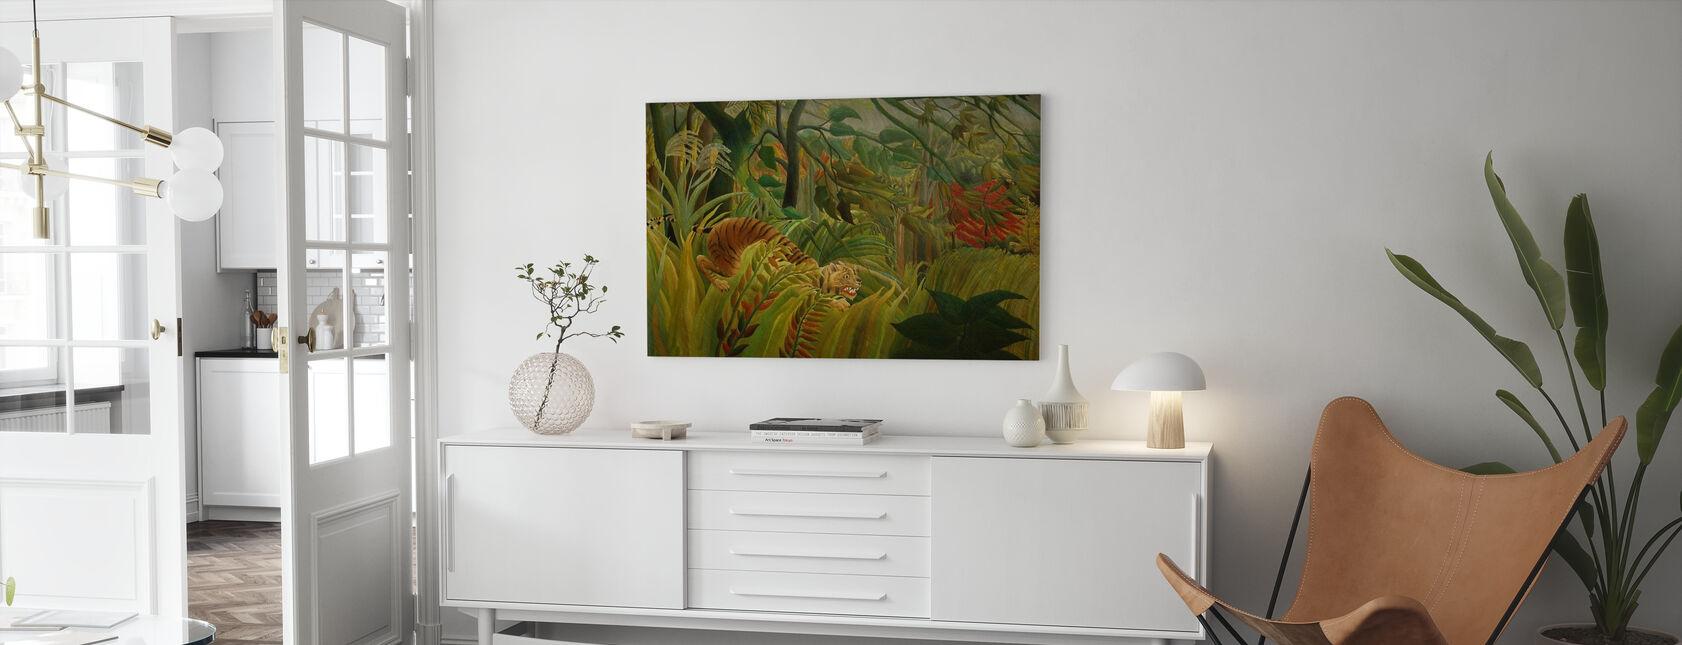 Tiger in a Tropical Storm, Henri Rousseau - Canvas print - Living Room